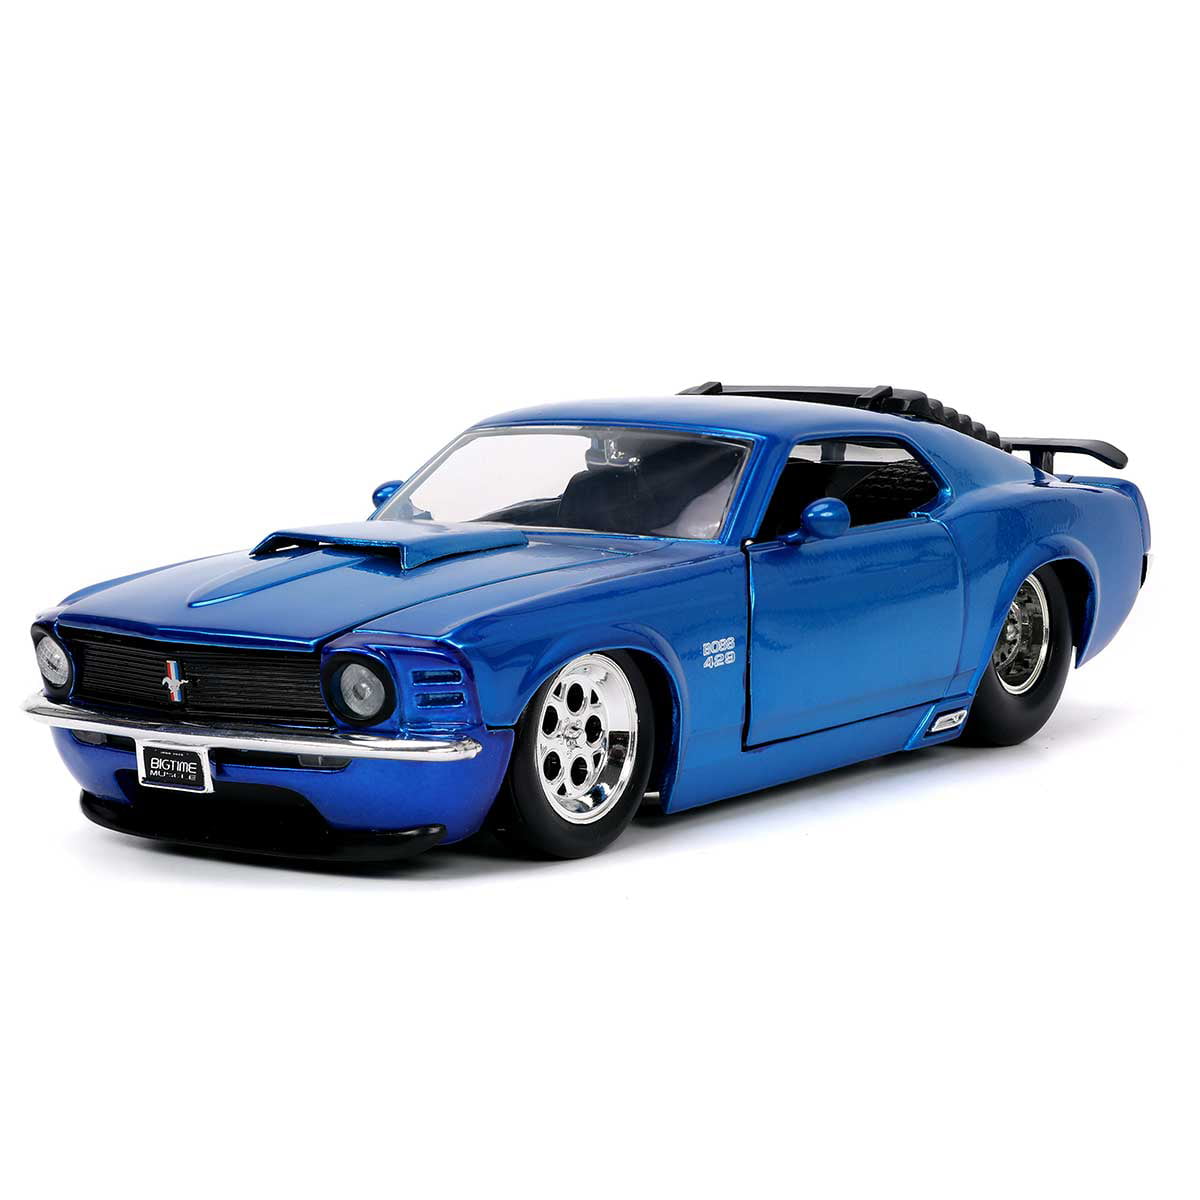 Bigtime Muscle 1:24 1970 Ford Mustang Boss 429 Die-cast Car Blue Toys for Kids and Adults 